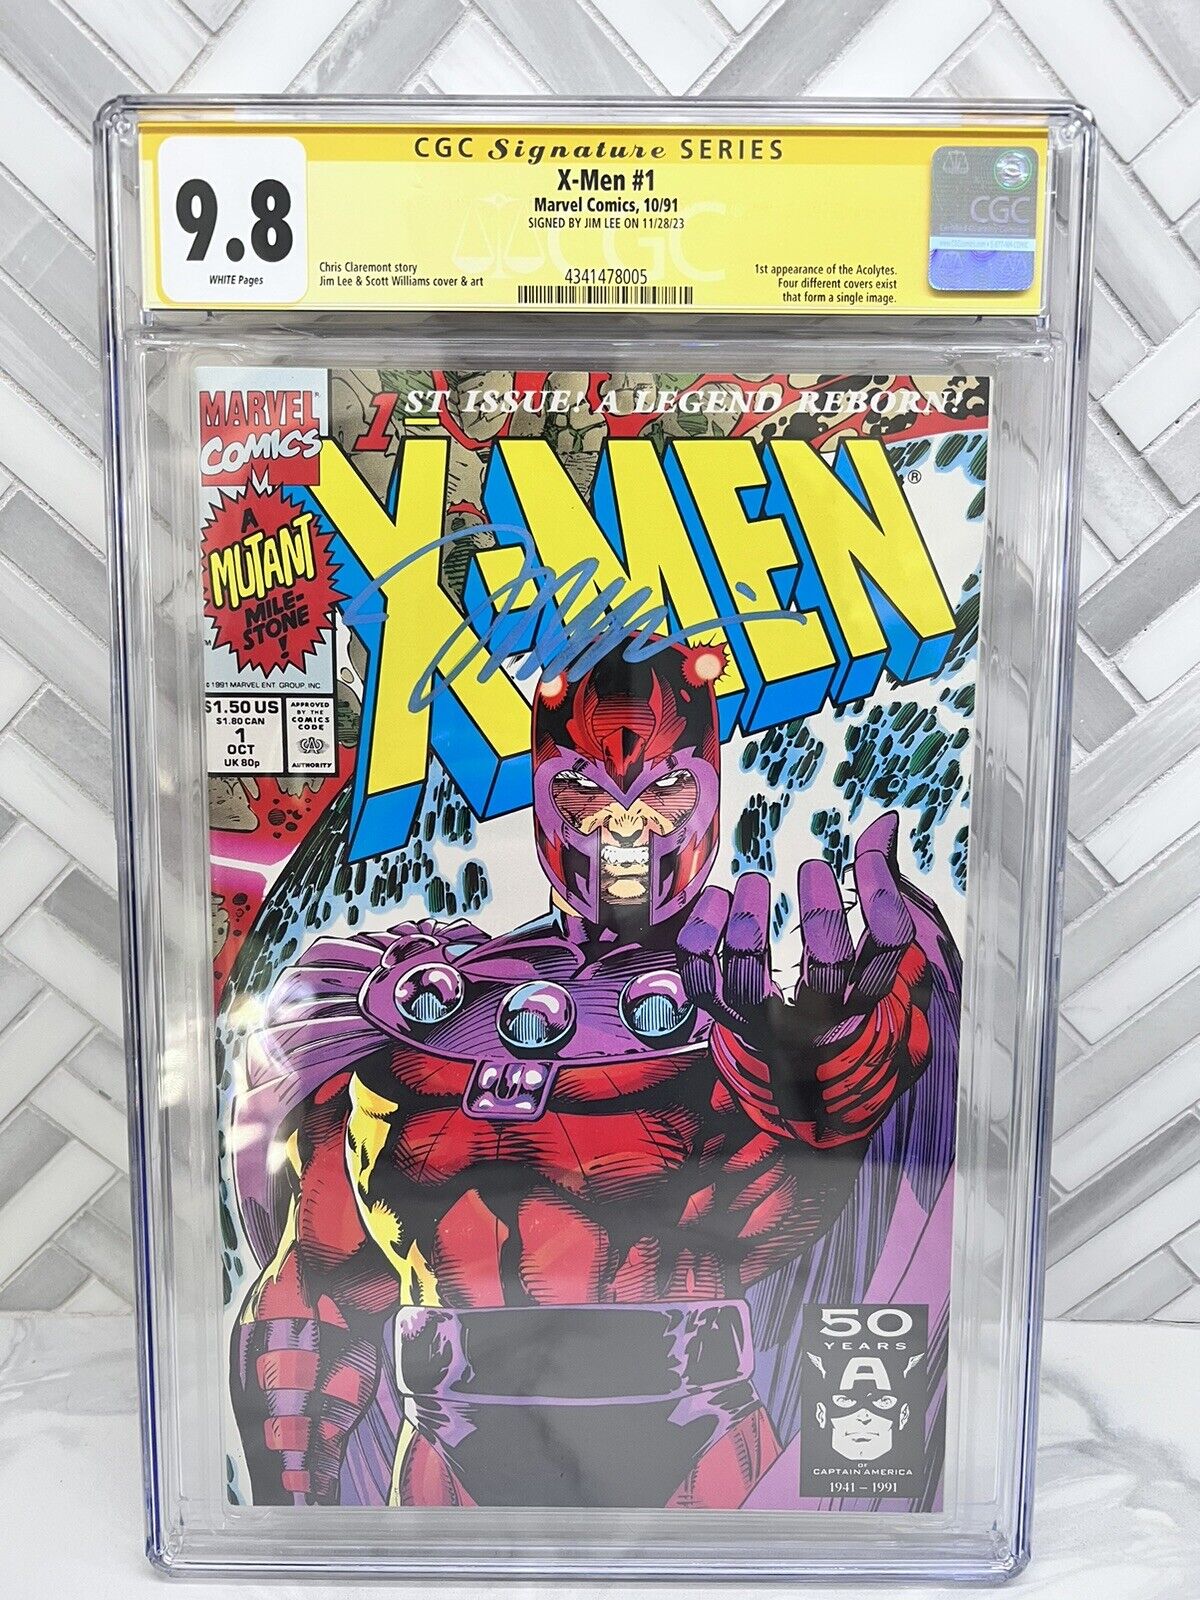 Rare X-Men #1 CGC SS 9.8 Signed by Jim Lee 1991 KEY Issue - Magneto